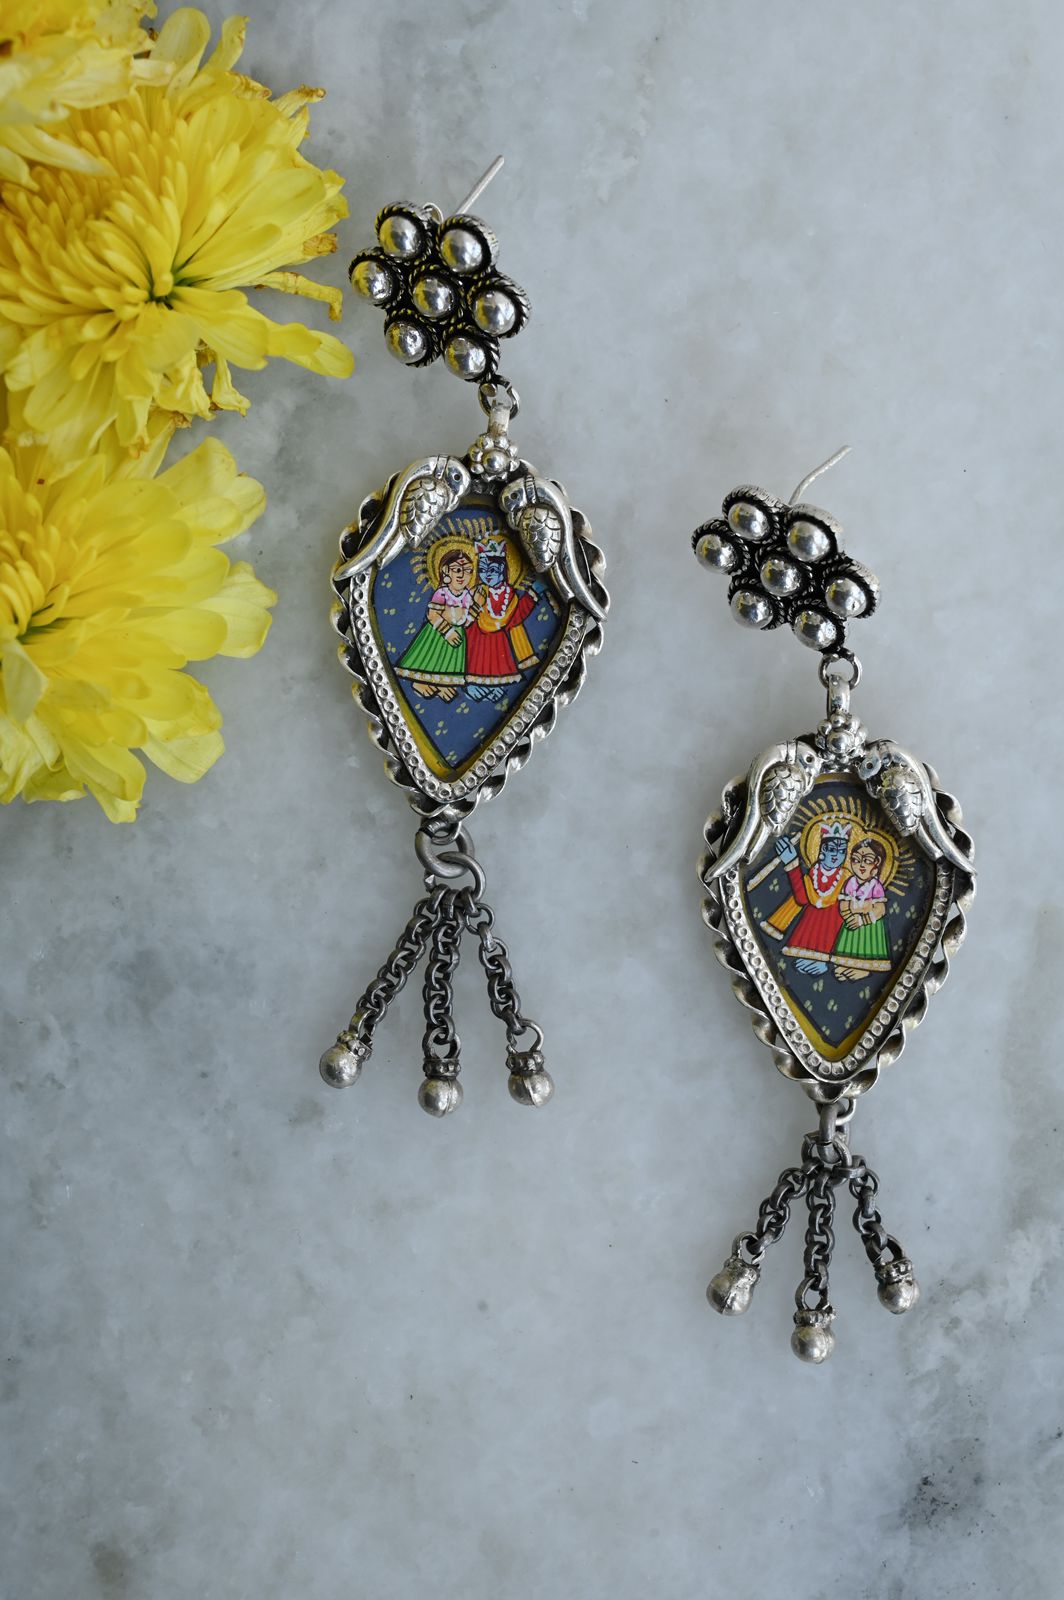 Handcrafted Silver Earrings with Hand Painting of Radha Krishna